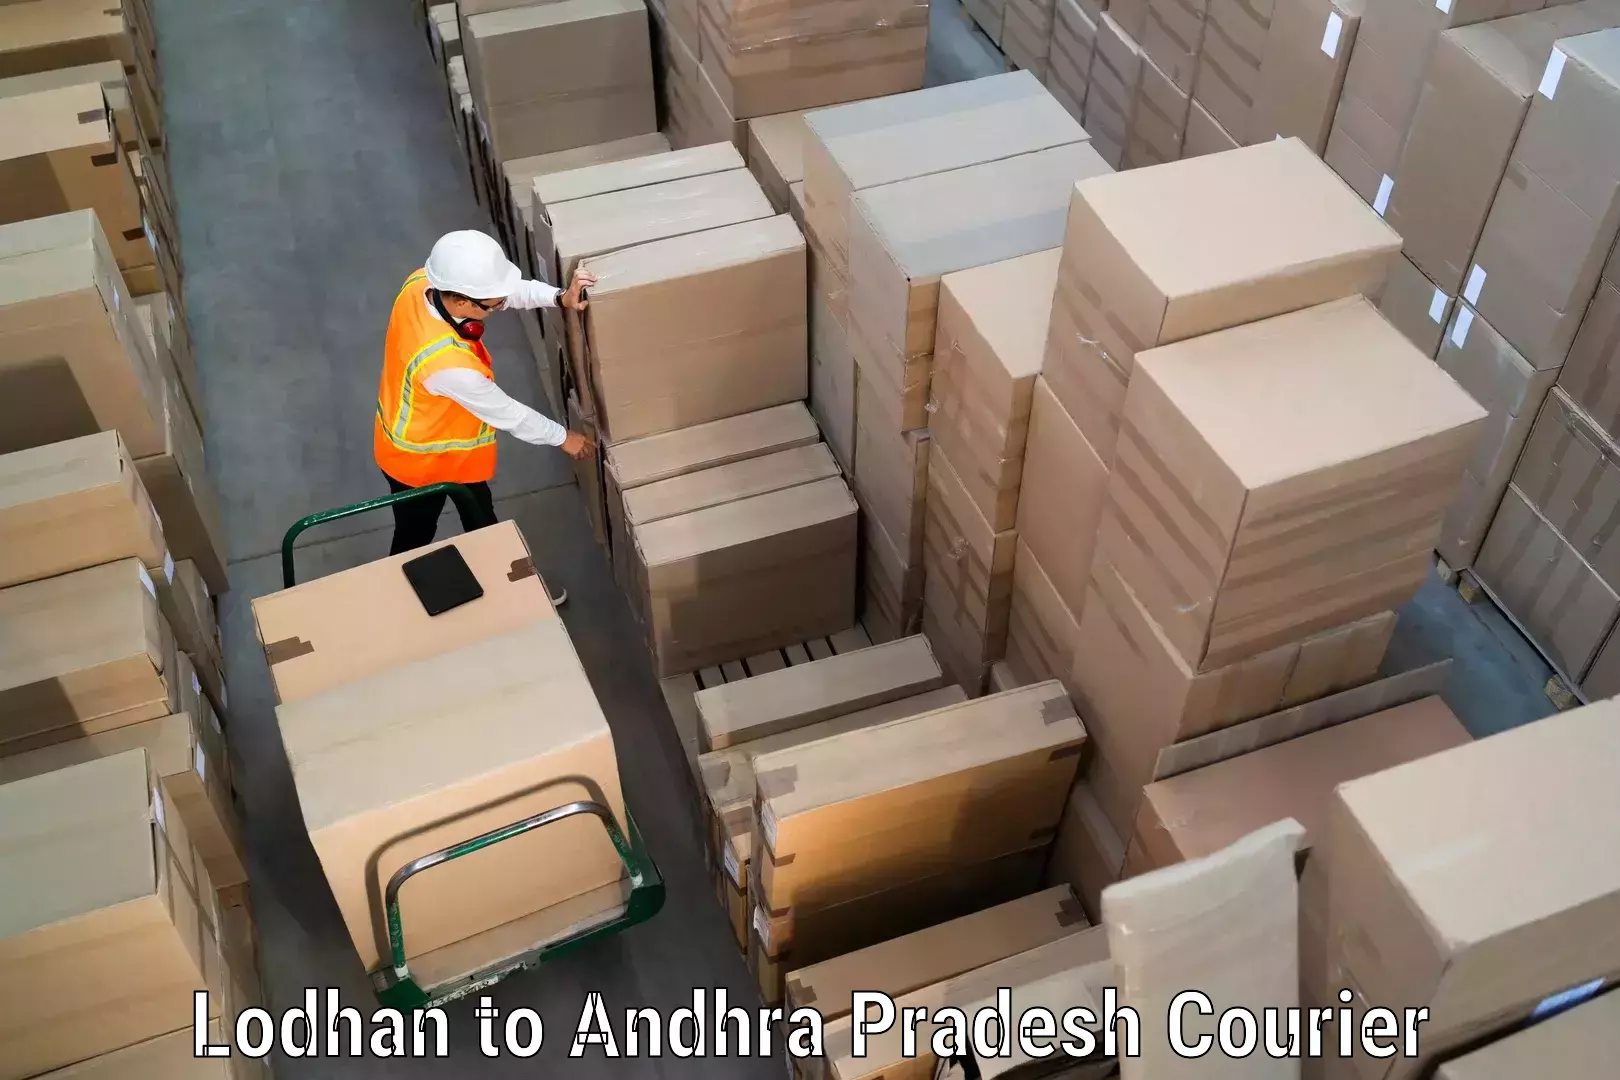 Next-day freight services Lodhan to Nandyal